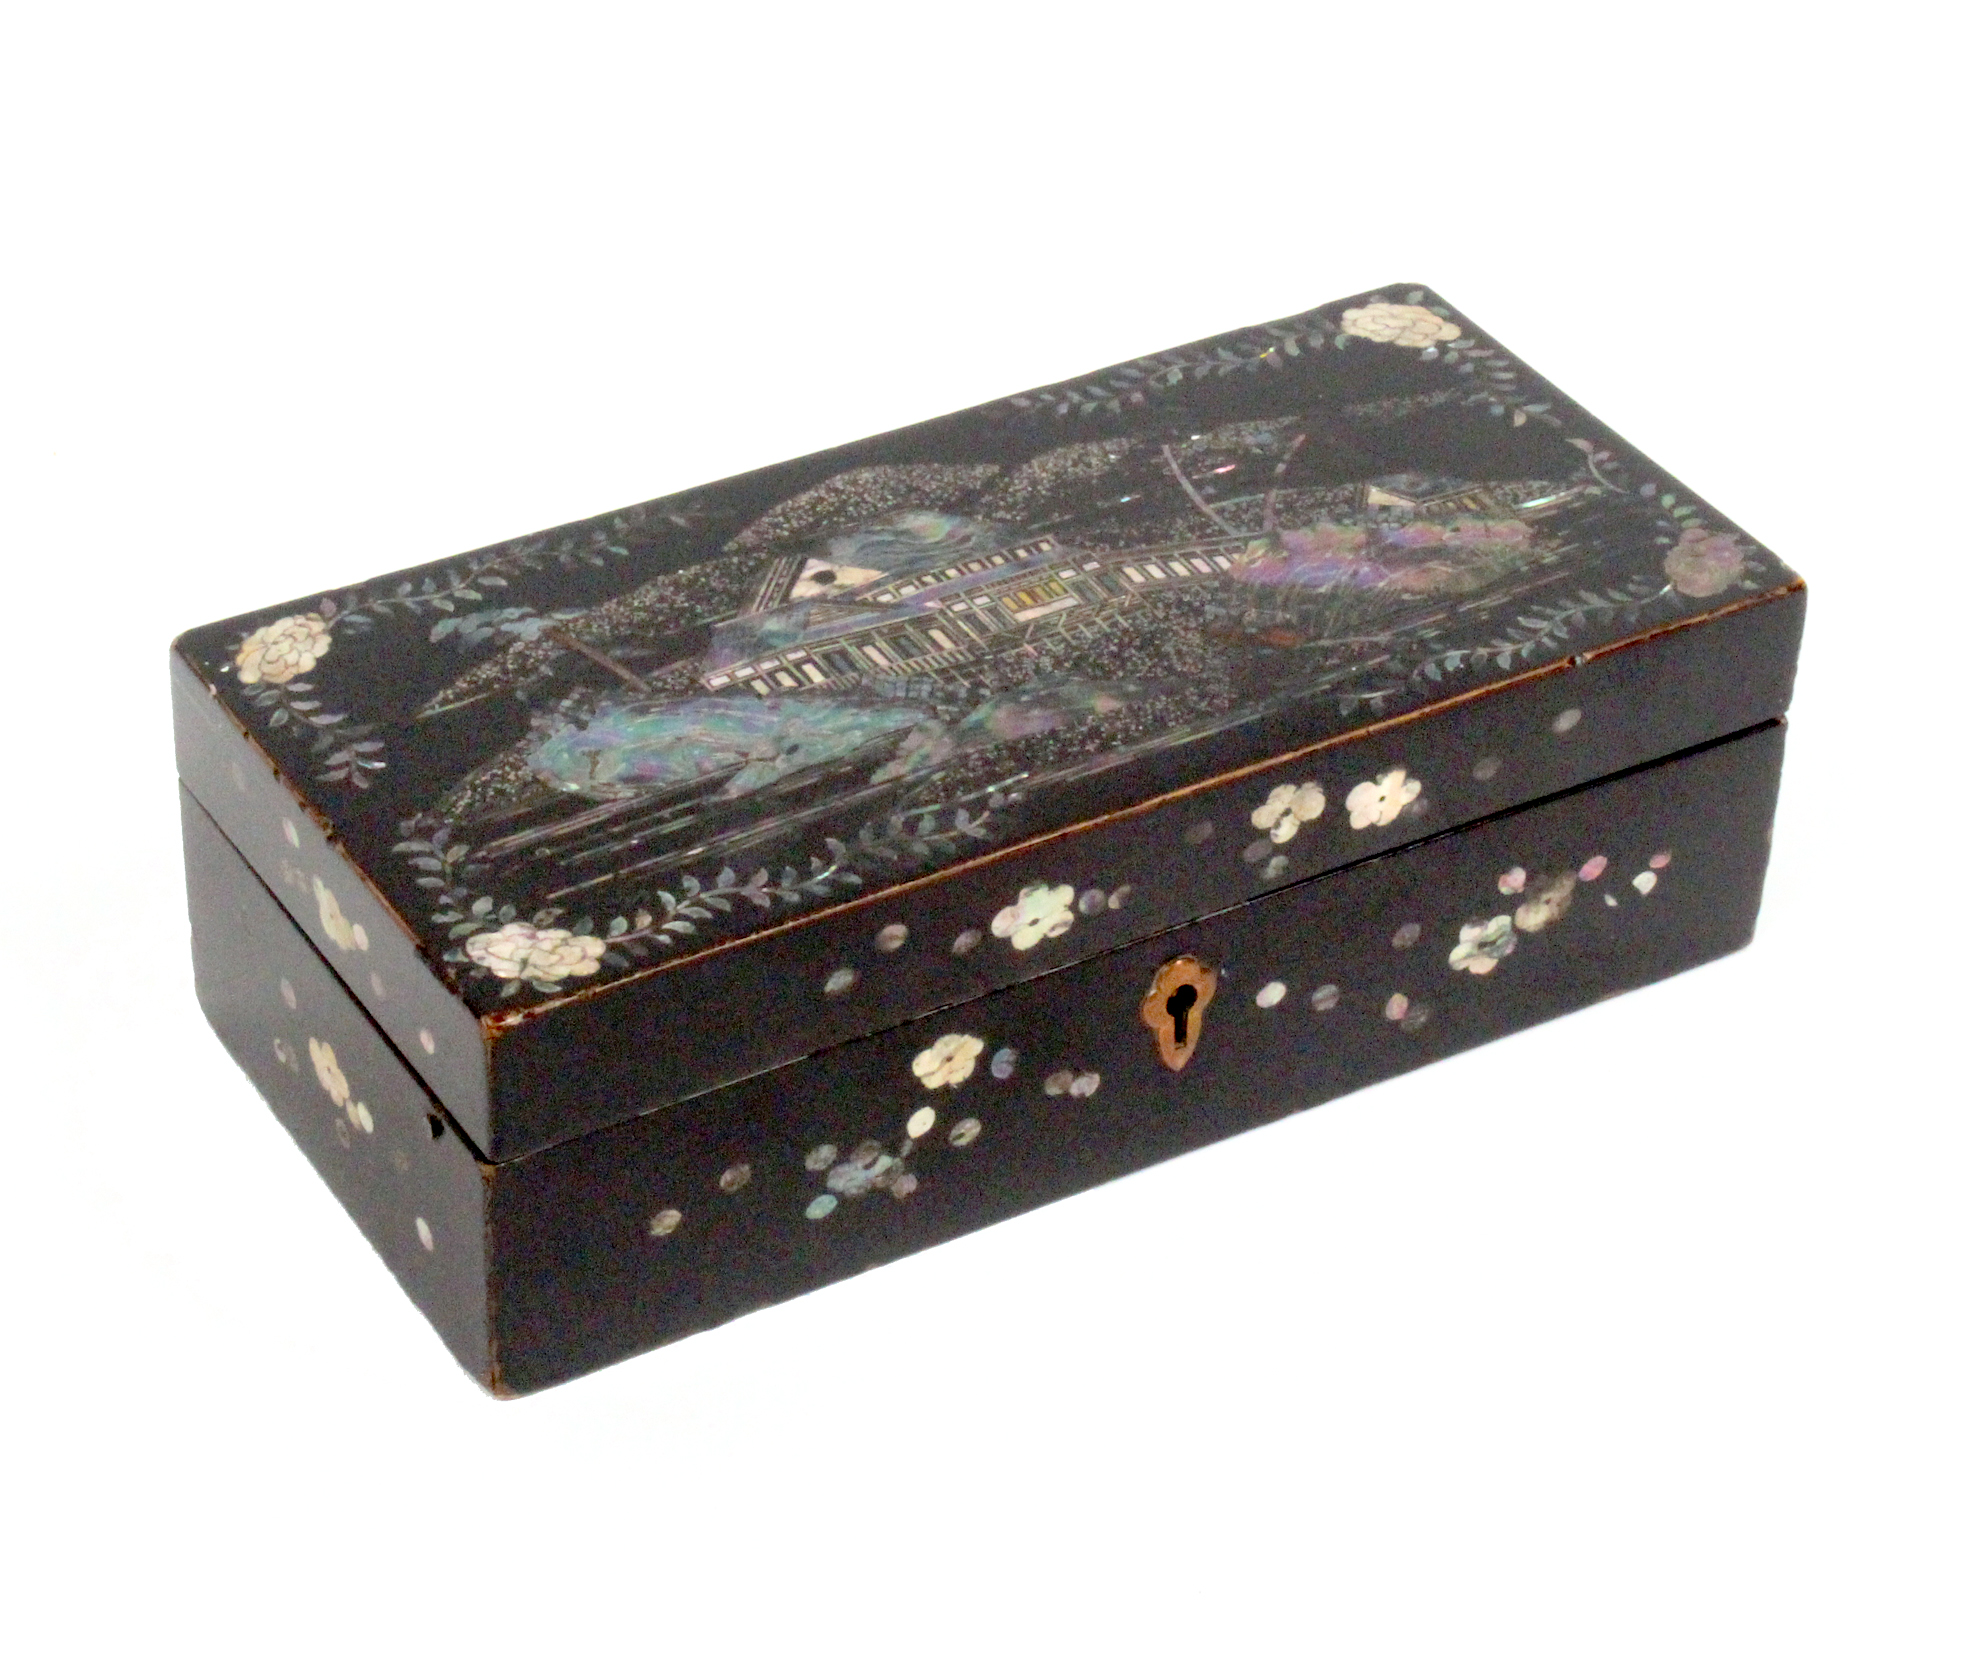 An unusual Japanese black lacquer and pearl inlaid netting box, circa 1830, the lid with a view of a